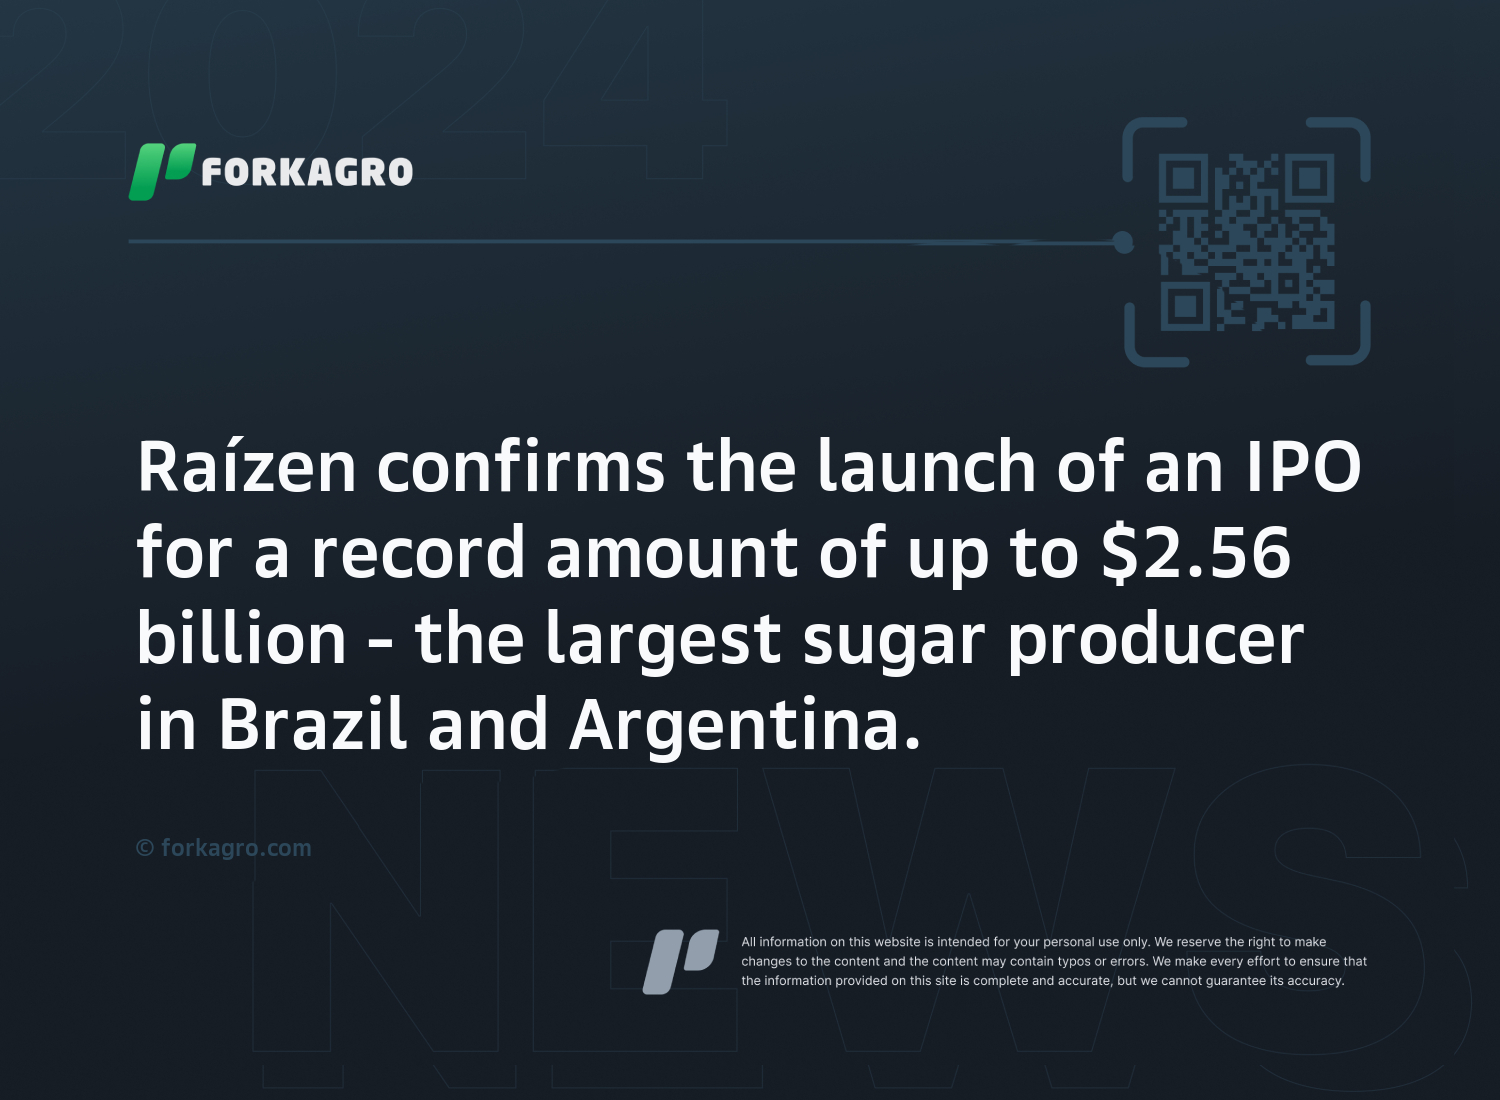 Raízen confirms the launch of an IPO for a record amount of up to $2.56 billion - the largest sugar producer in Brazil and Argentina.